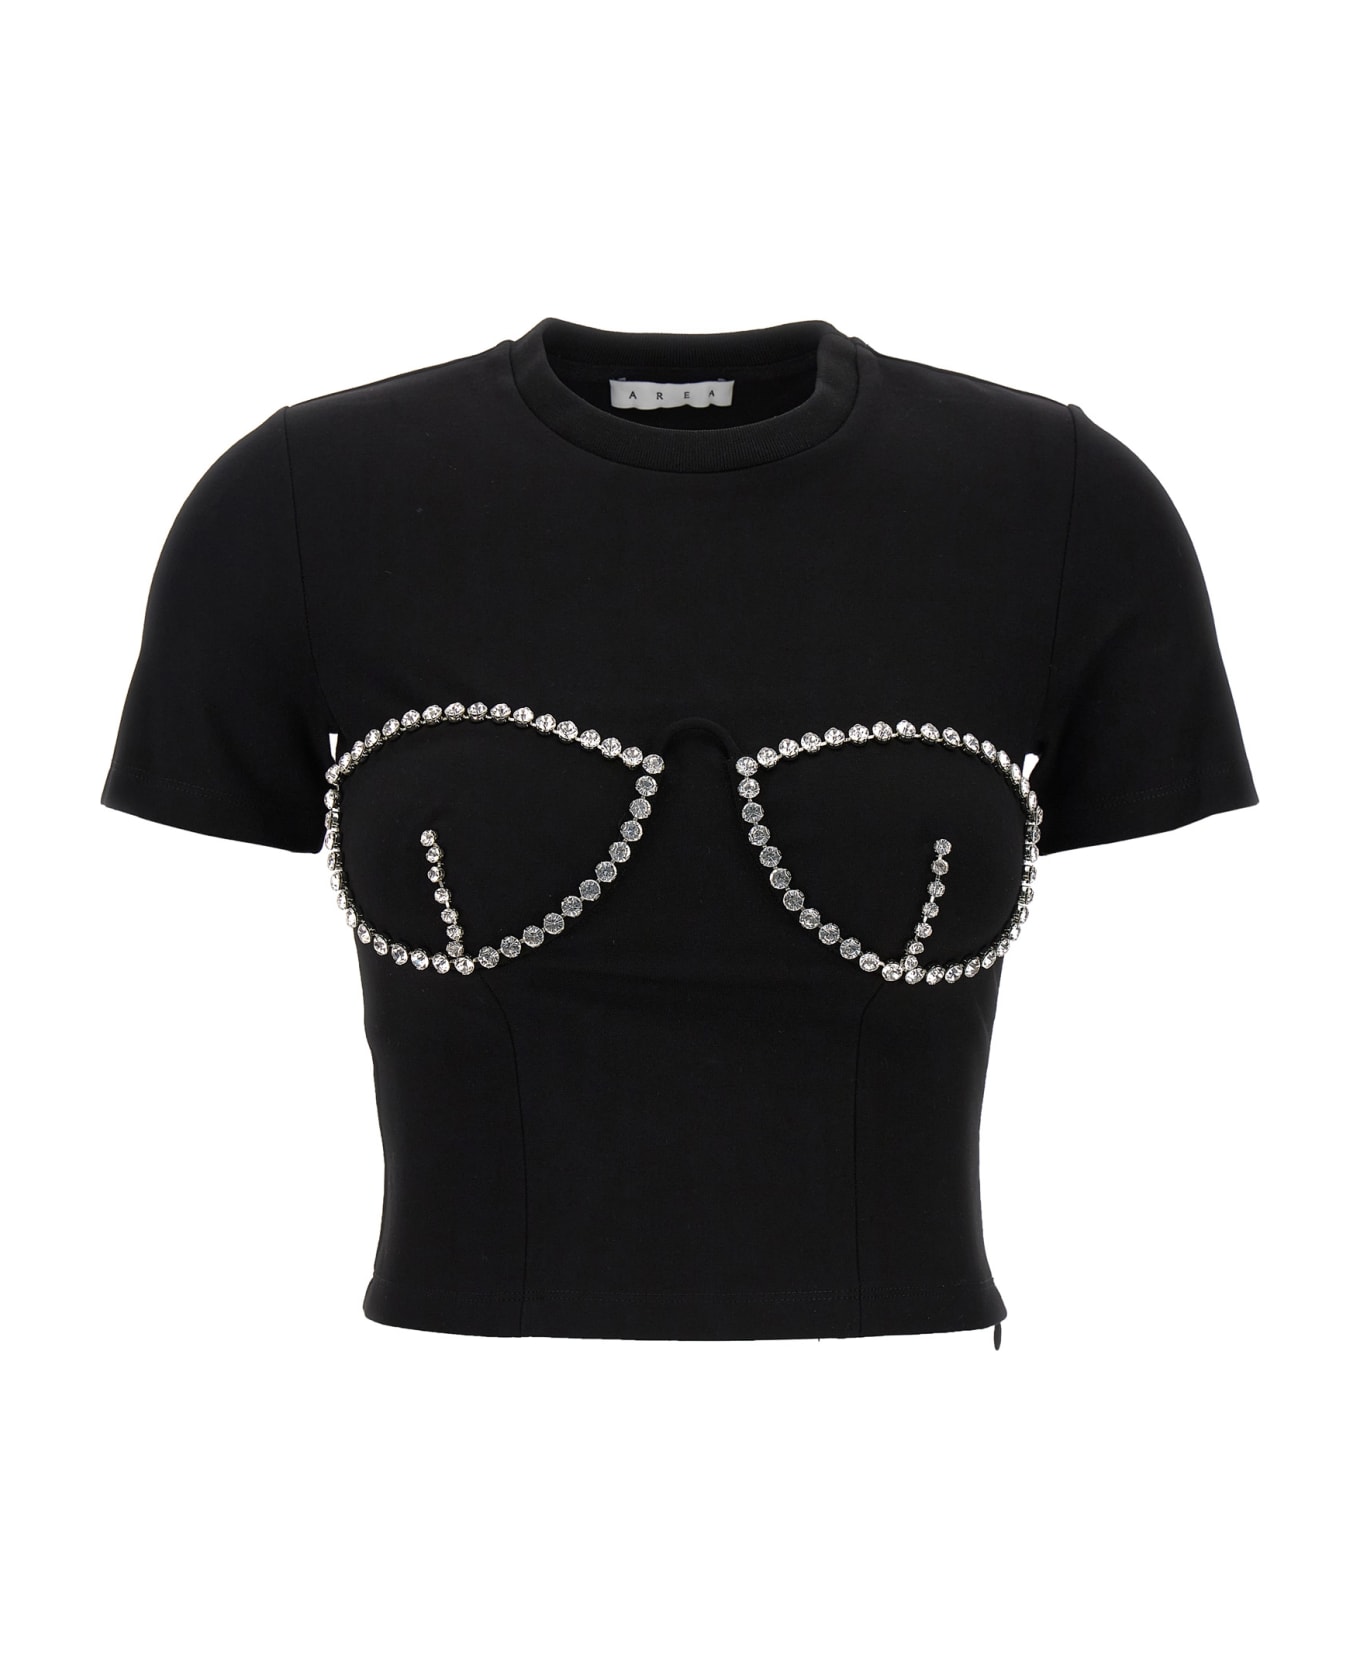 AREA T-shirt 'crystal Bustier Cup' - Black   Tシャツ